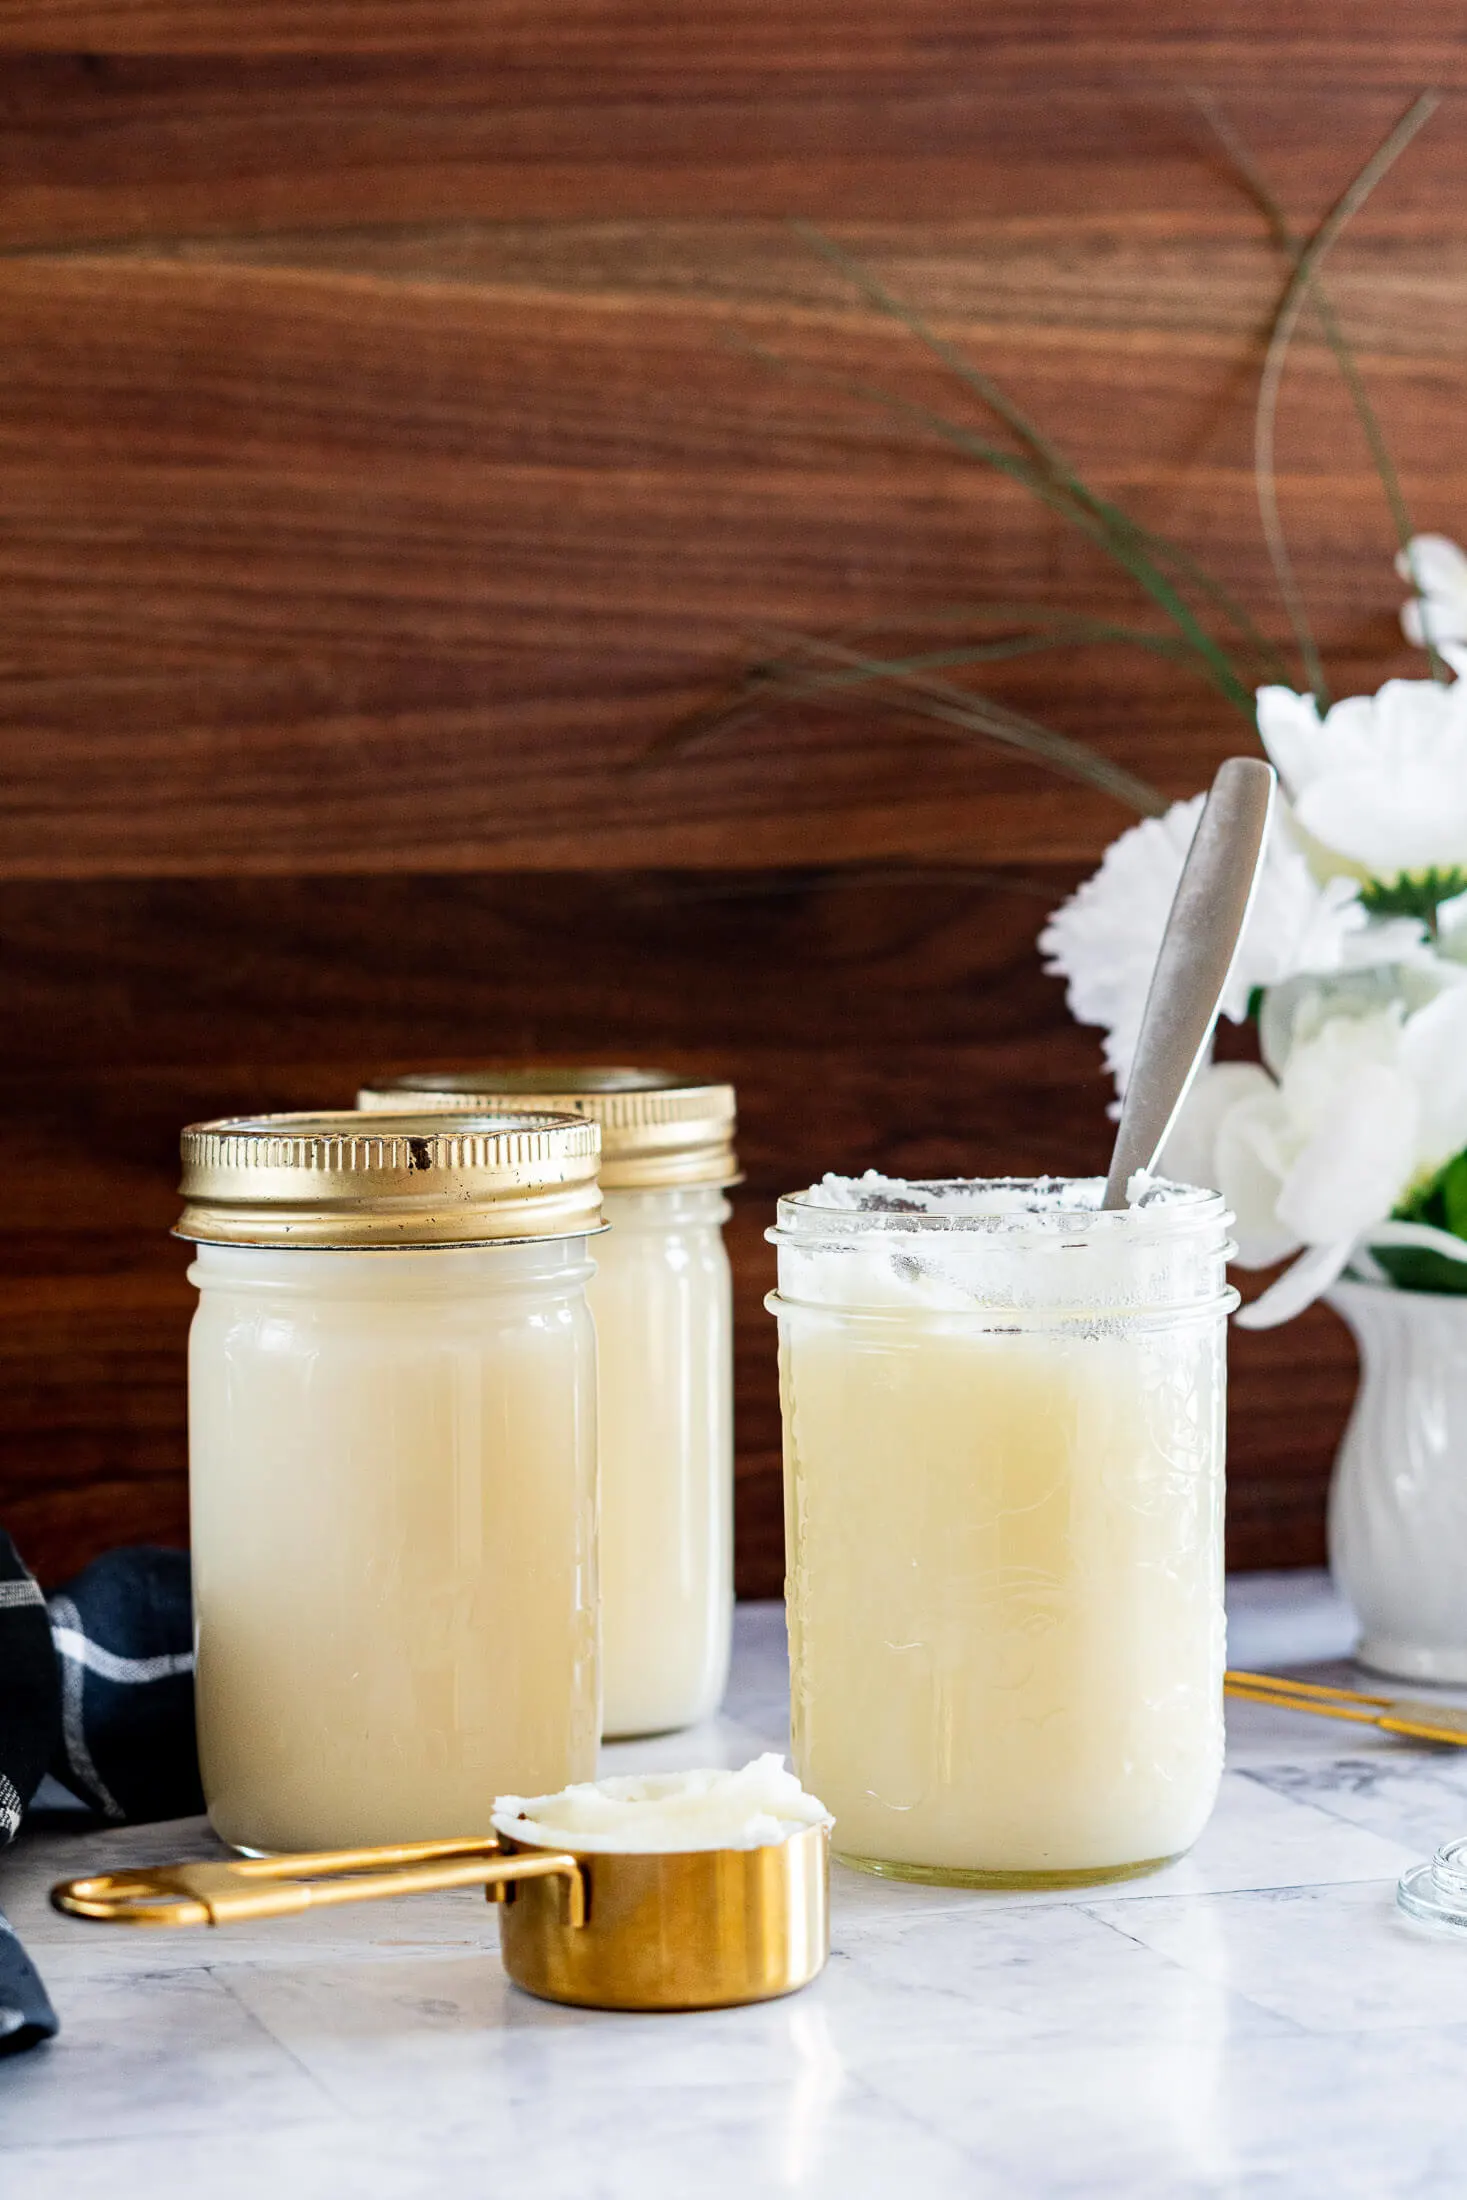 Homemade tallow in glass jars. 